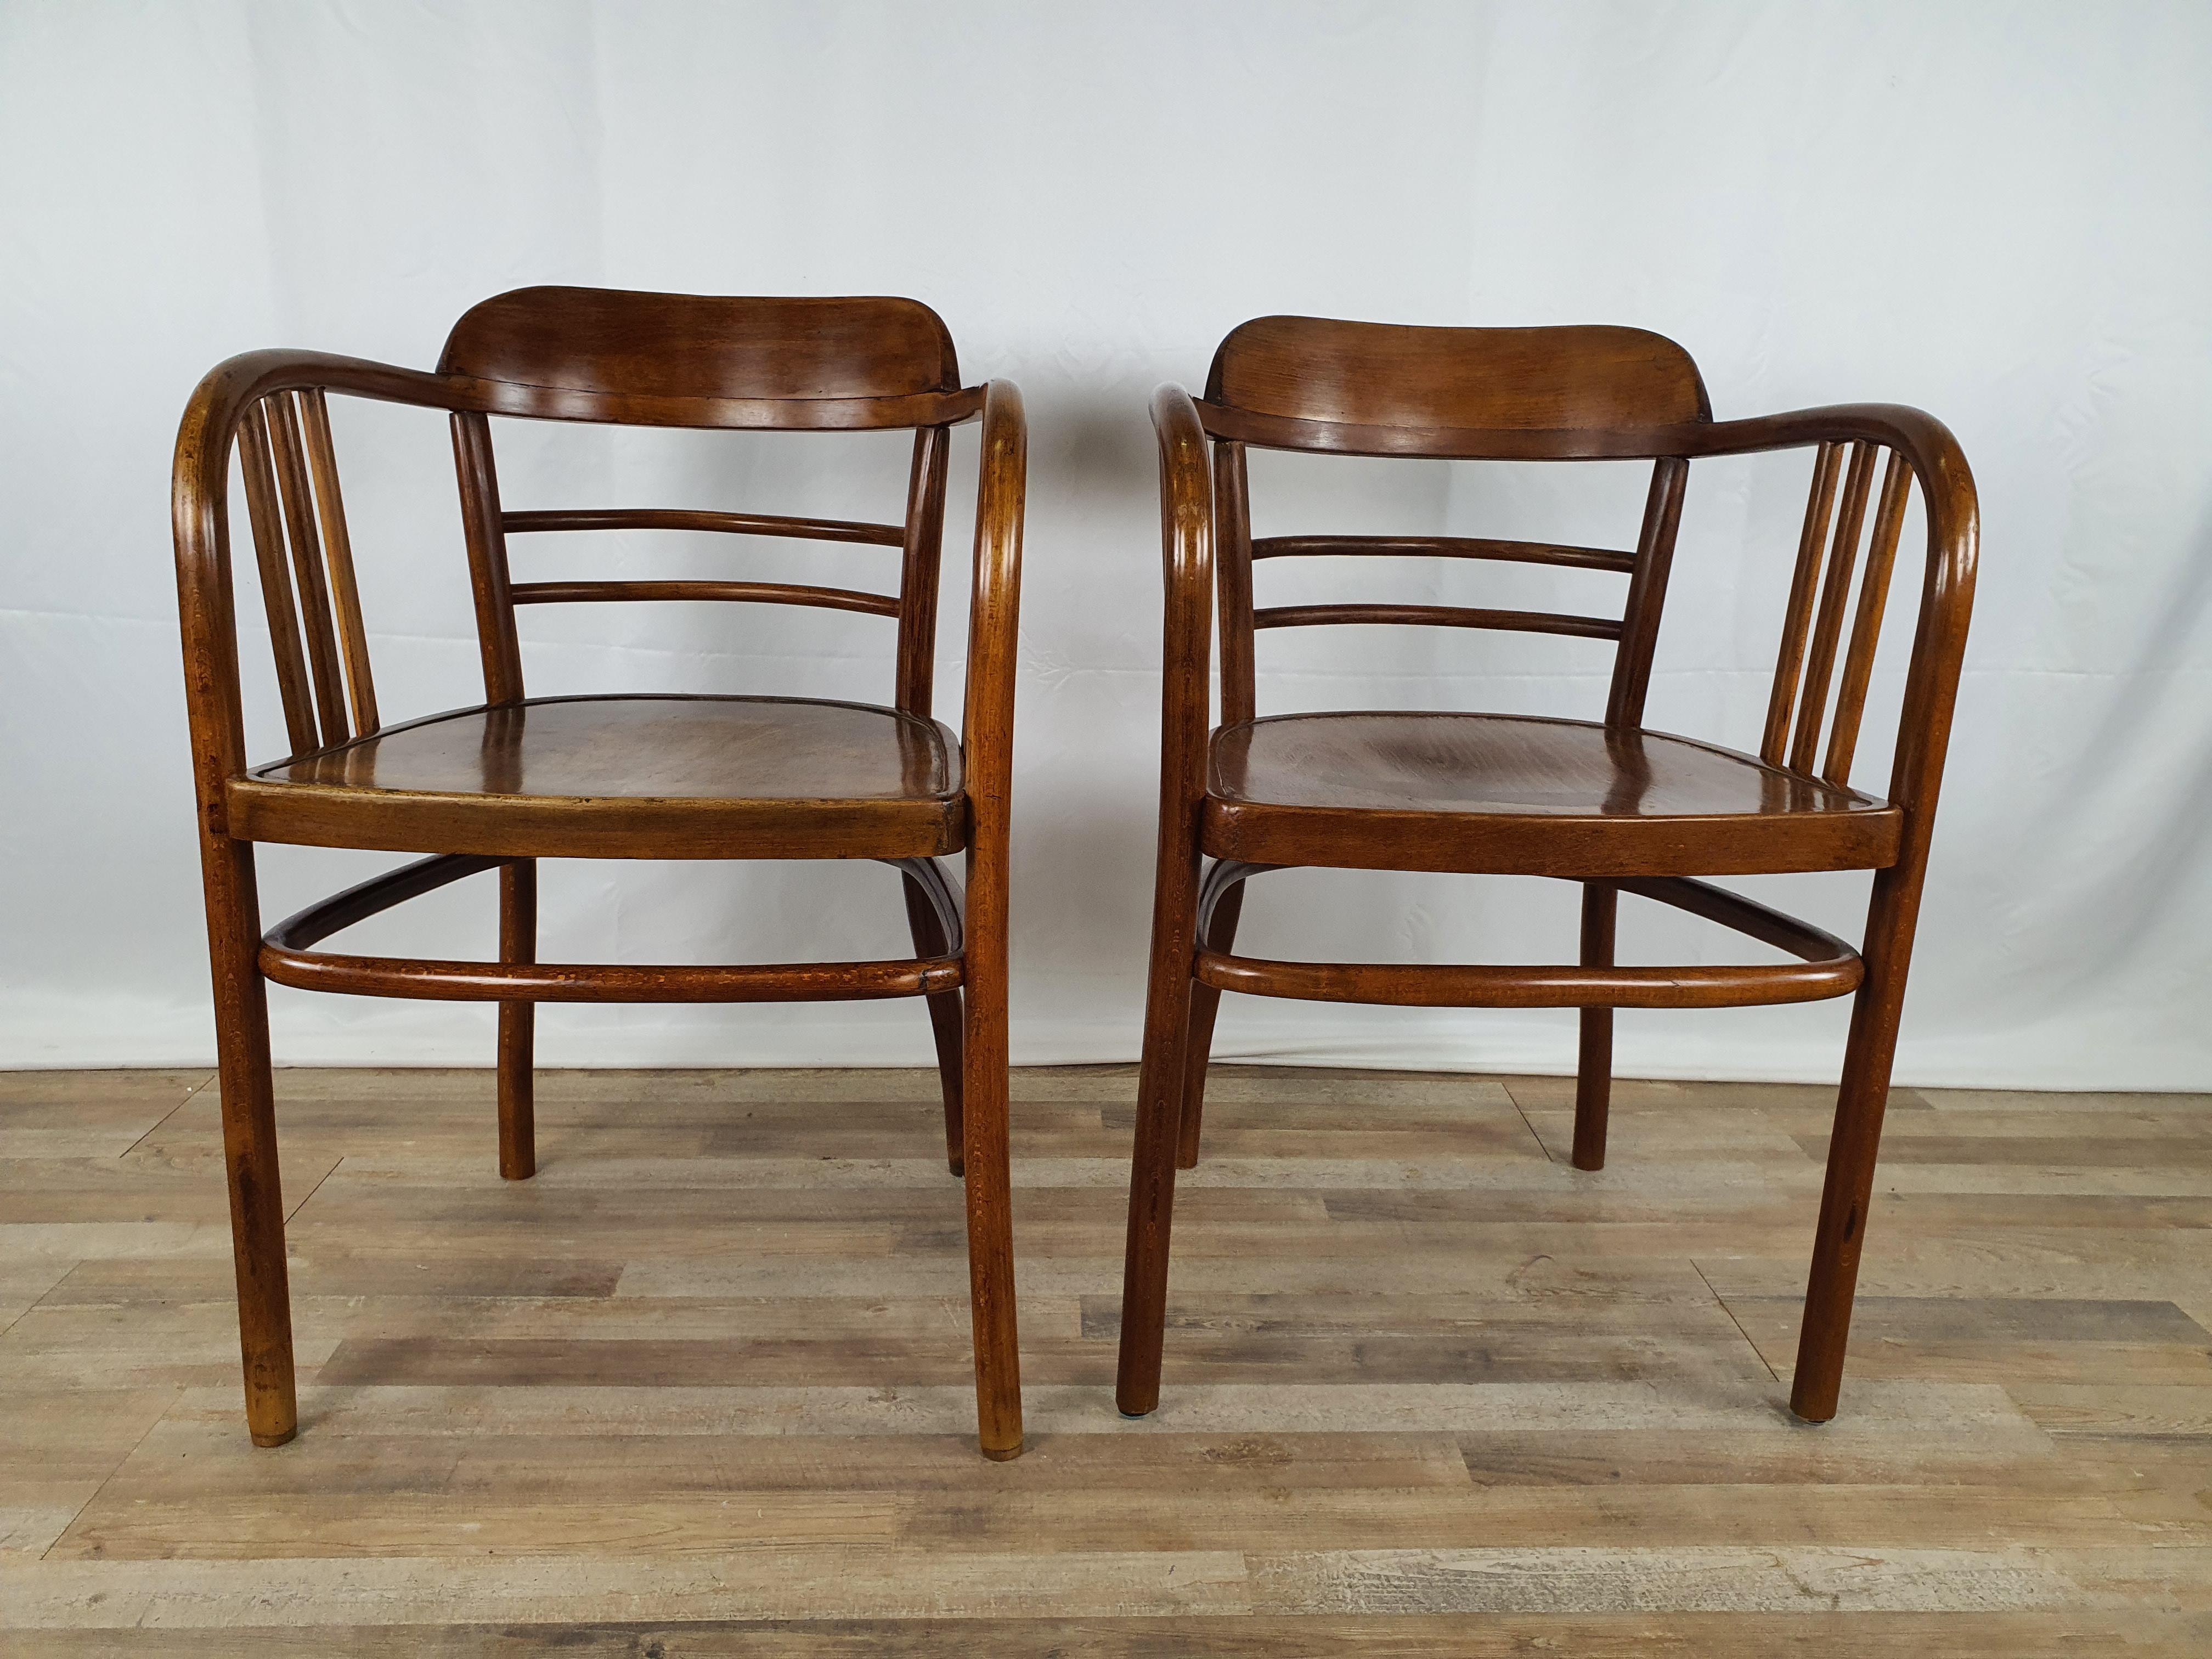 Pair of Viennese armchairs in bent beech, produced around 1918 by Jacob & Joseph Kohn in Austria.

Present in the Thonet catalog as the B93 model with the double front arch under the seat, these are the Kohn variants with the complete leg-to-leg